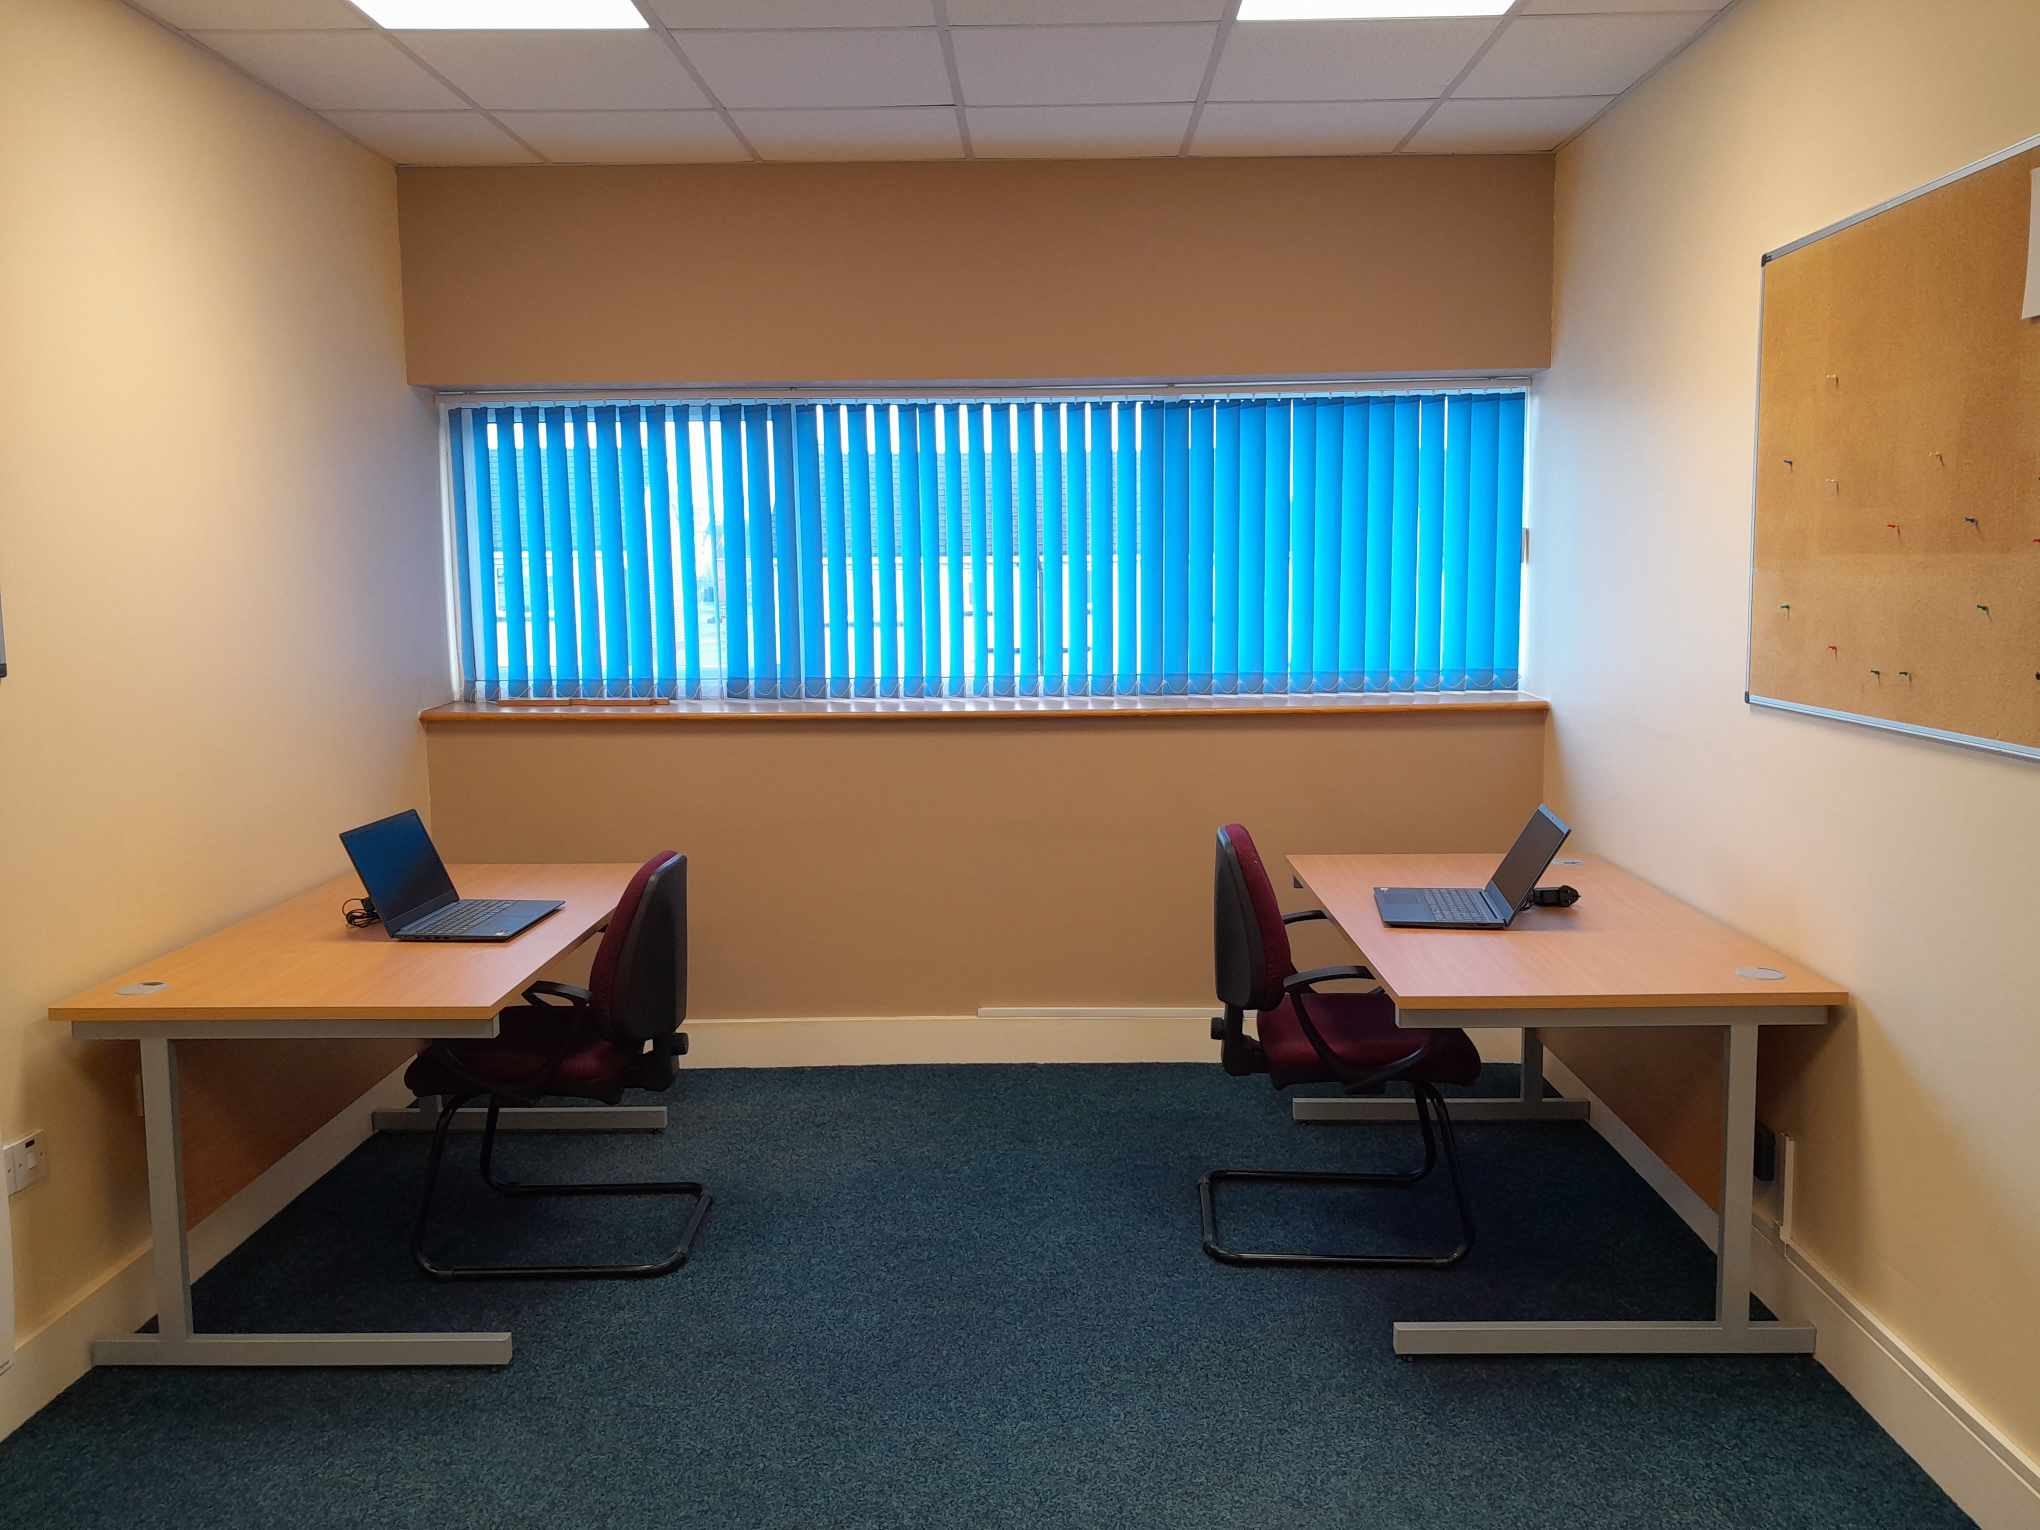 Hot Desk Special offer €10 per day for 10 days